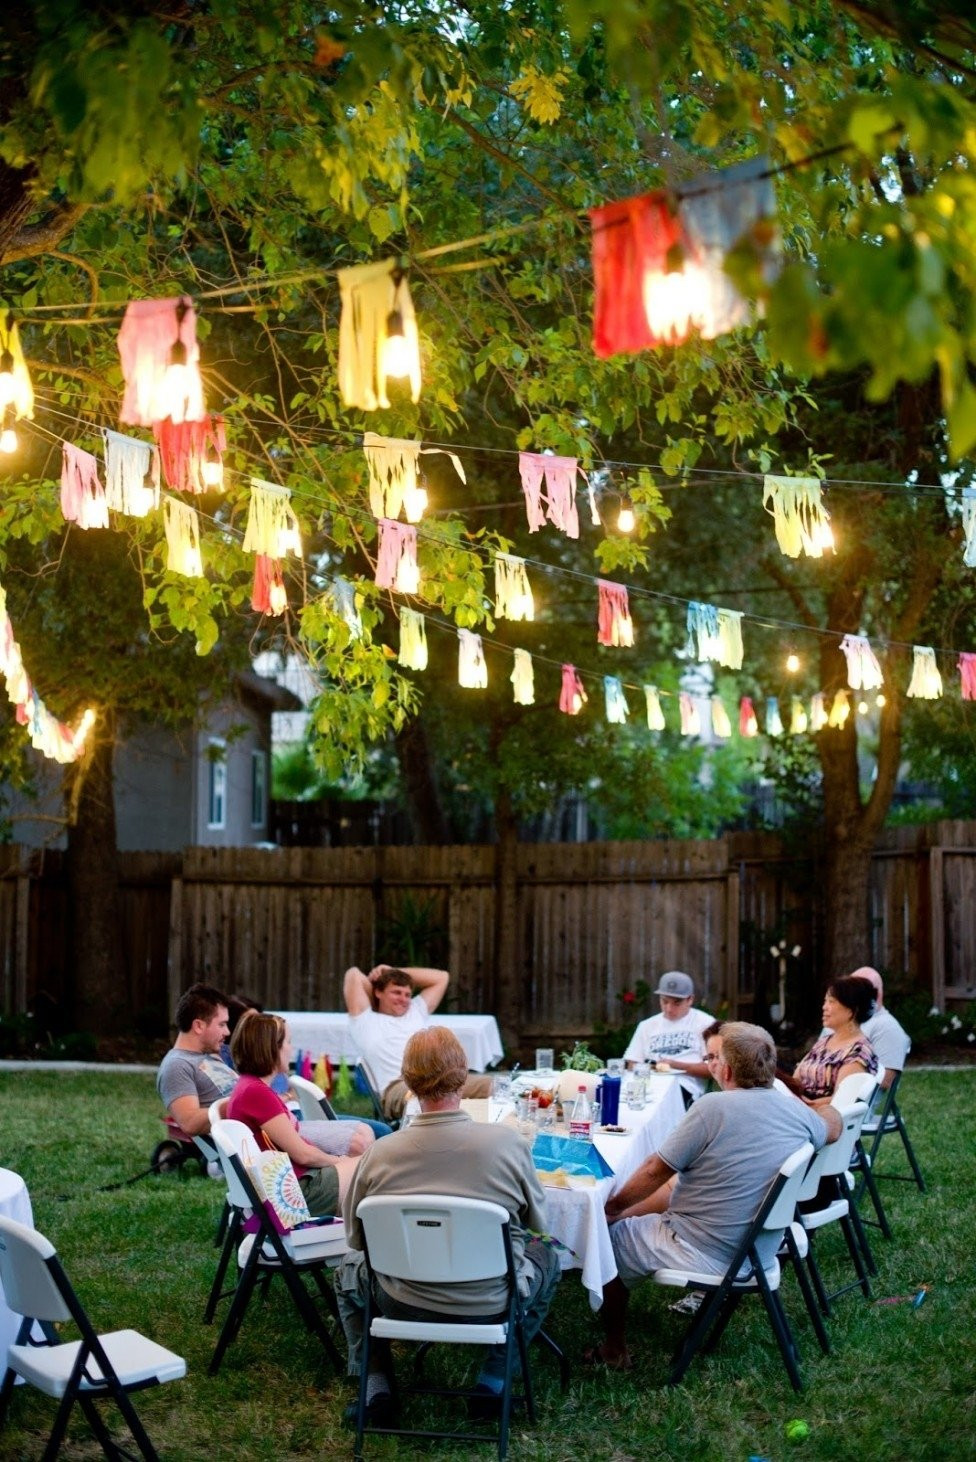 Cool Backyard Party Ideas
 10 Famous Outdoor Birthday Party Ideas For Adults 2019